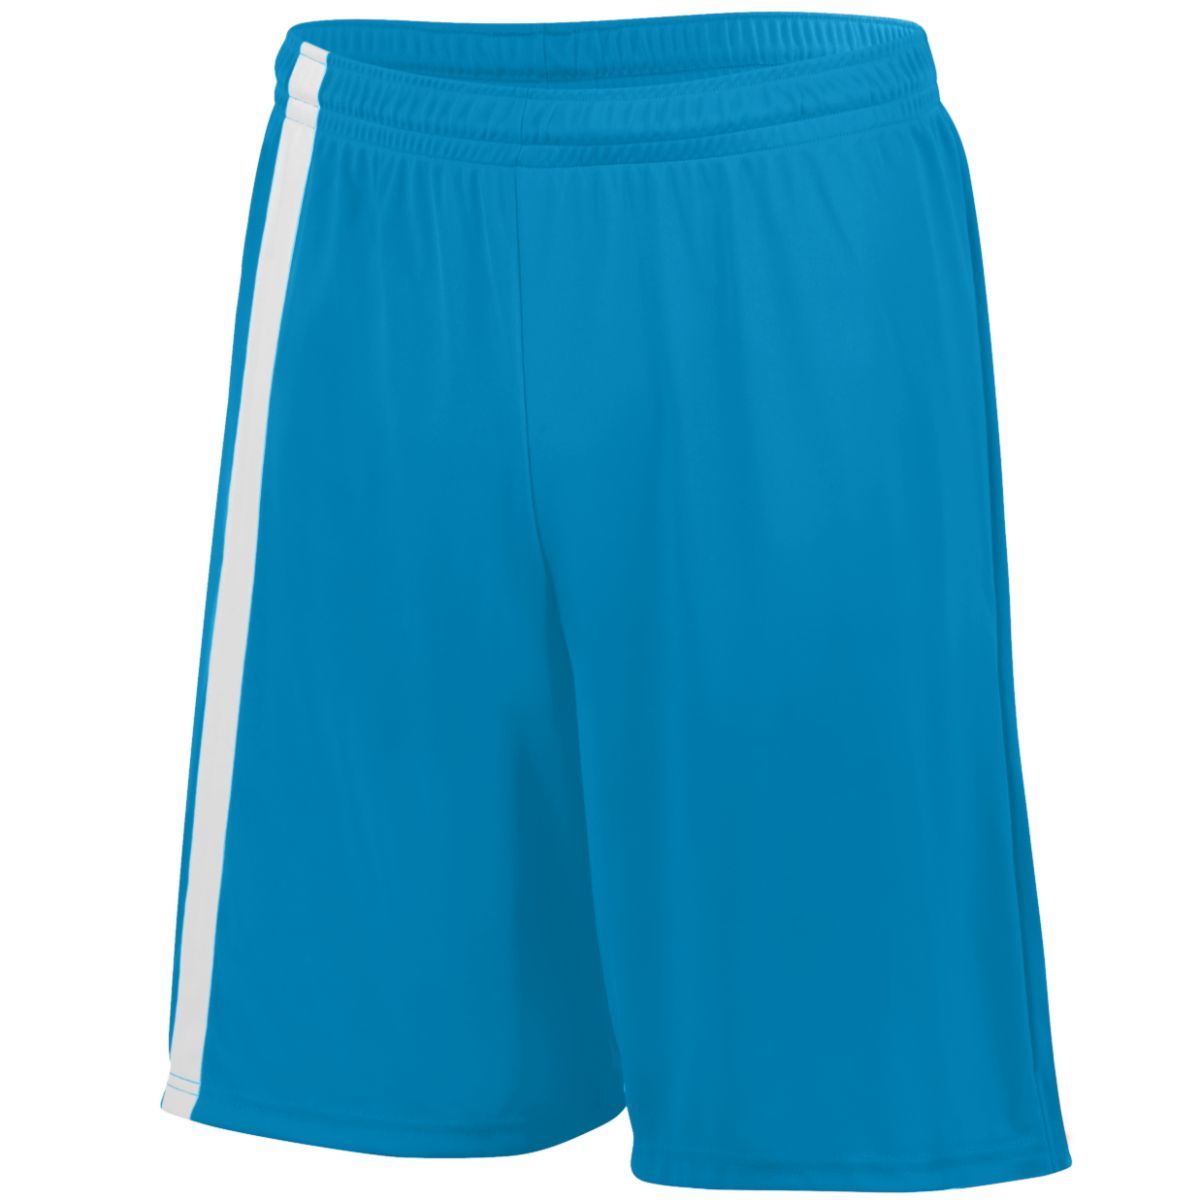 Augusta Sportswear Youth Attacking Third Shorts in Power Blue/White  -Part of the Youth, Youth-Shorts, Augusta-Products, Soccer, All-Sports-1 product lines at KanaleyCreations.com